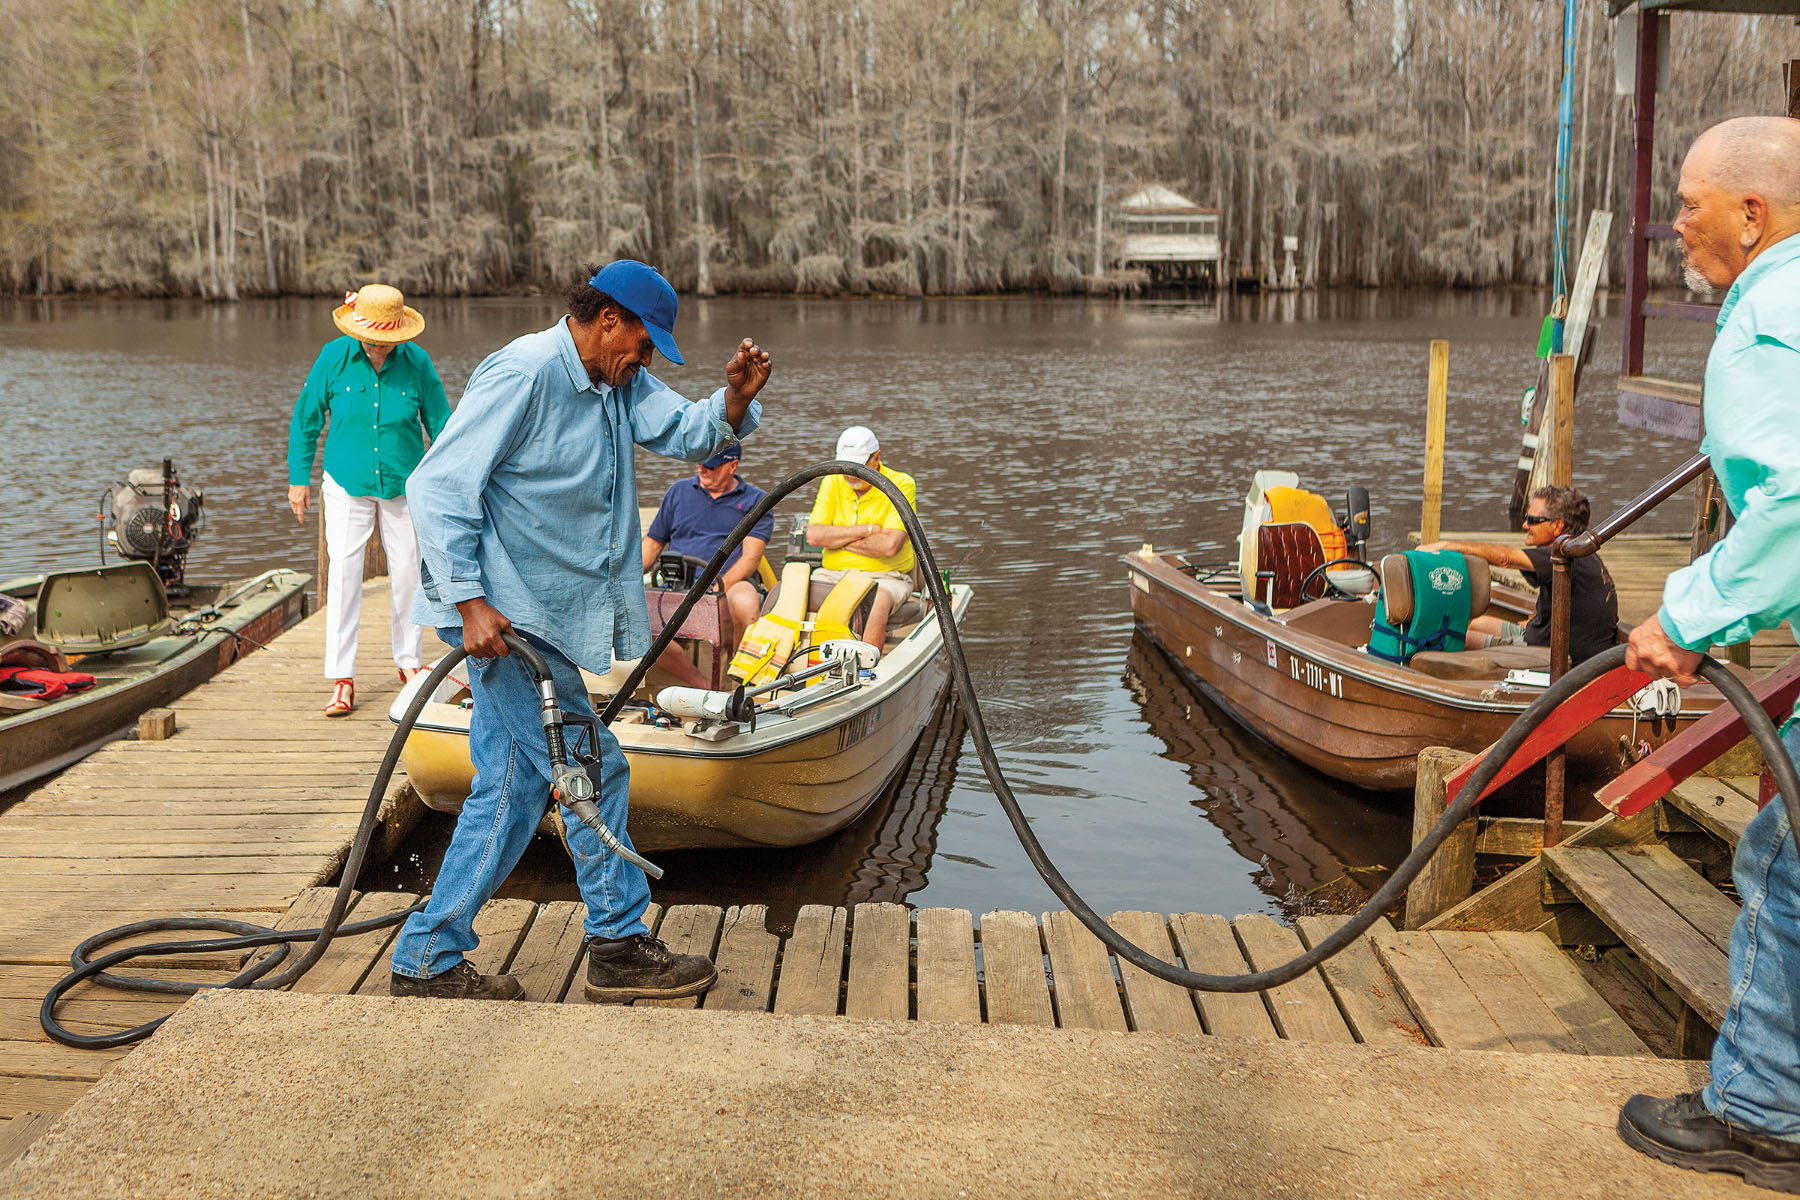 At Johnson’s Ranch Marina on Caddo Lake, the men in the foreground finish pumping gas into a boat while another boat returns from a successful fishing excursion.